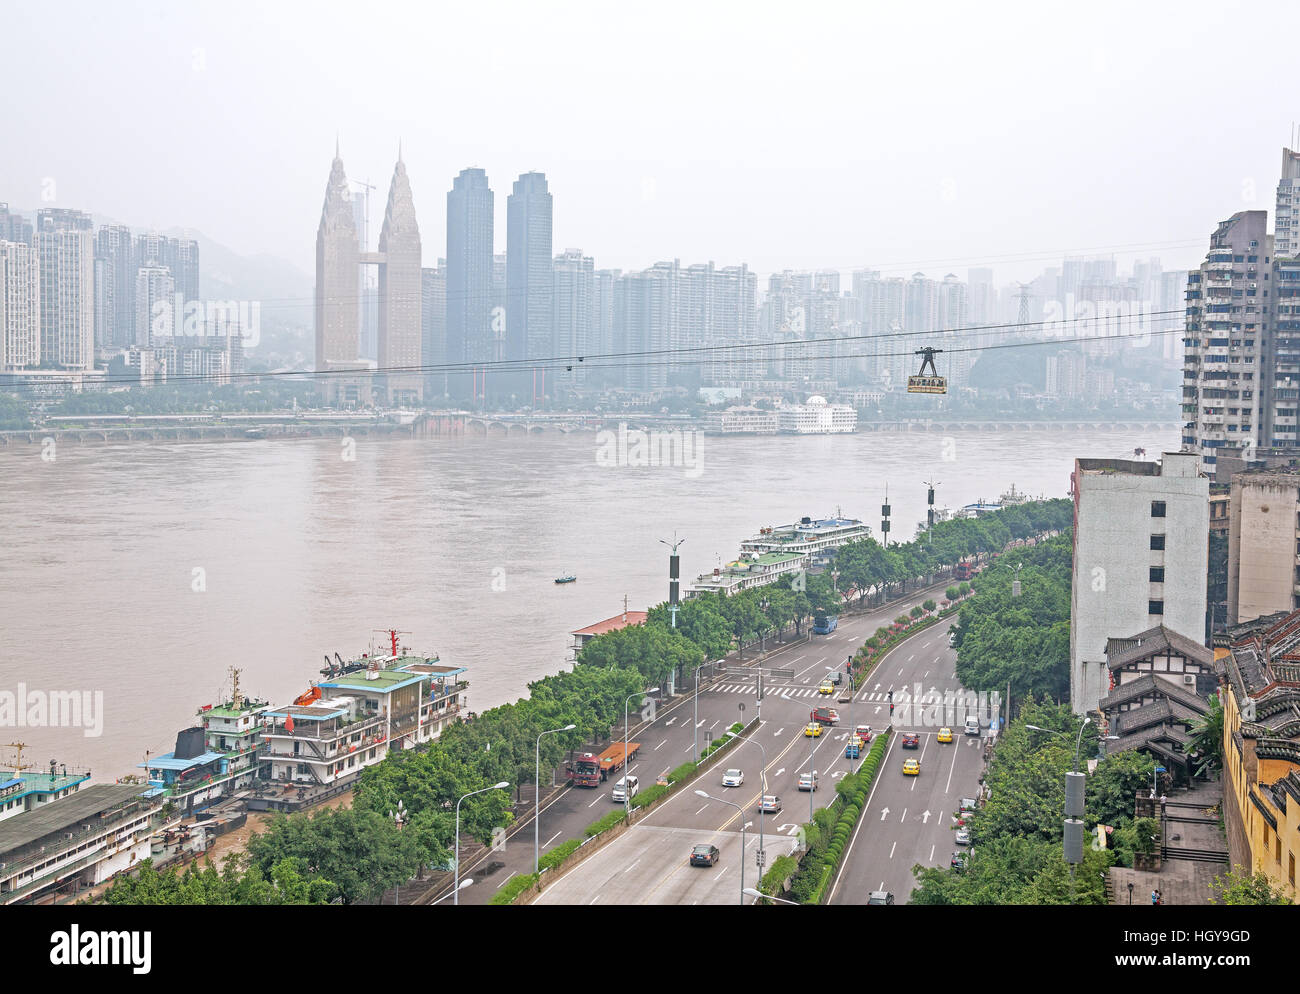 Chongqing downtown. Chongqing is the largest city in China. Stock Photo